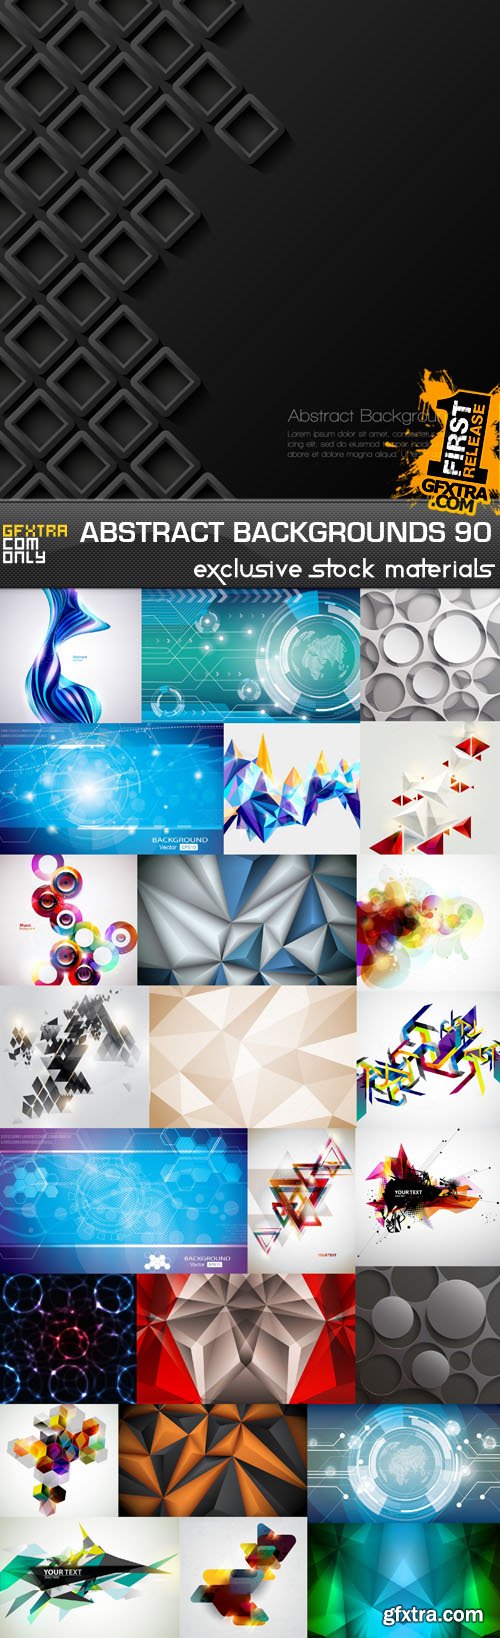 Collection of Vector Abstract Backgrounds #90, 25xEPS